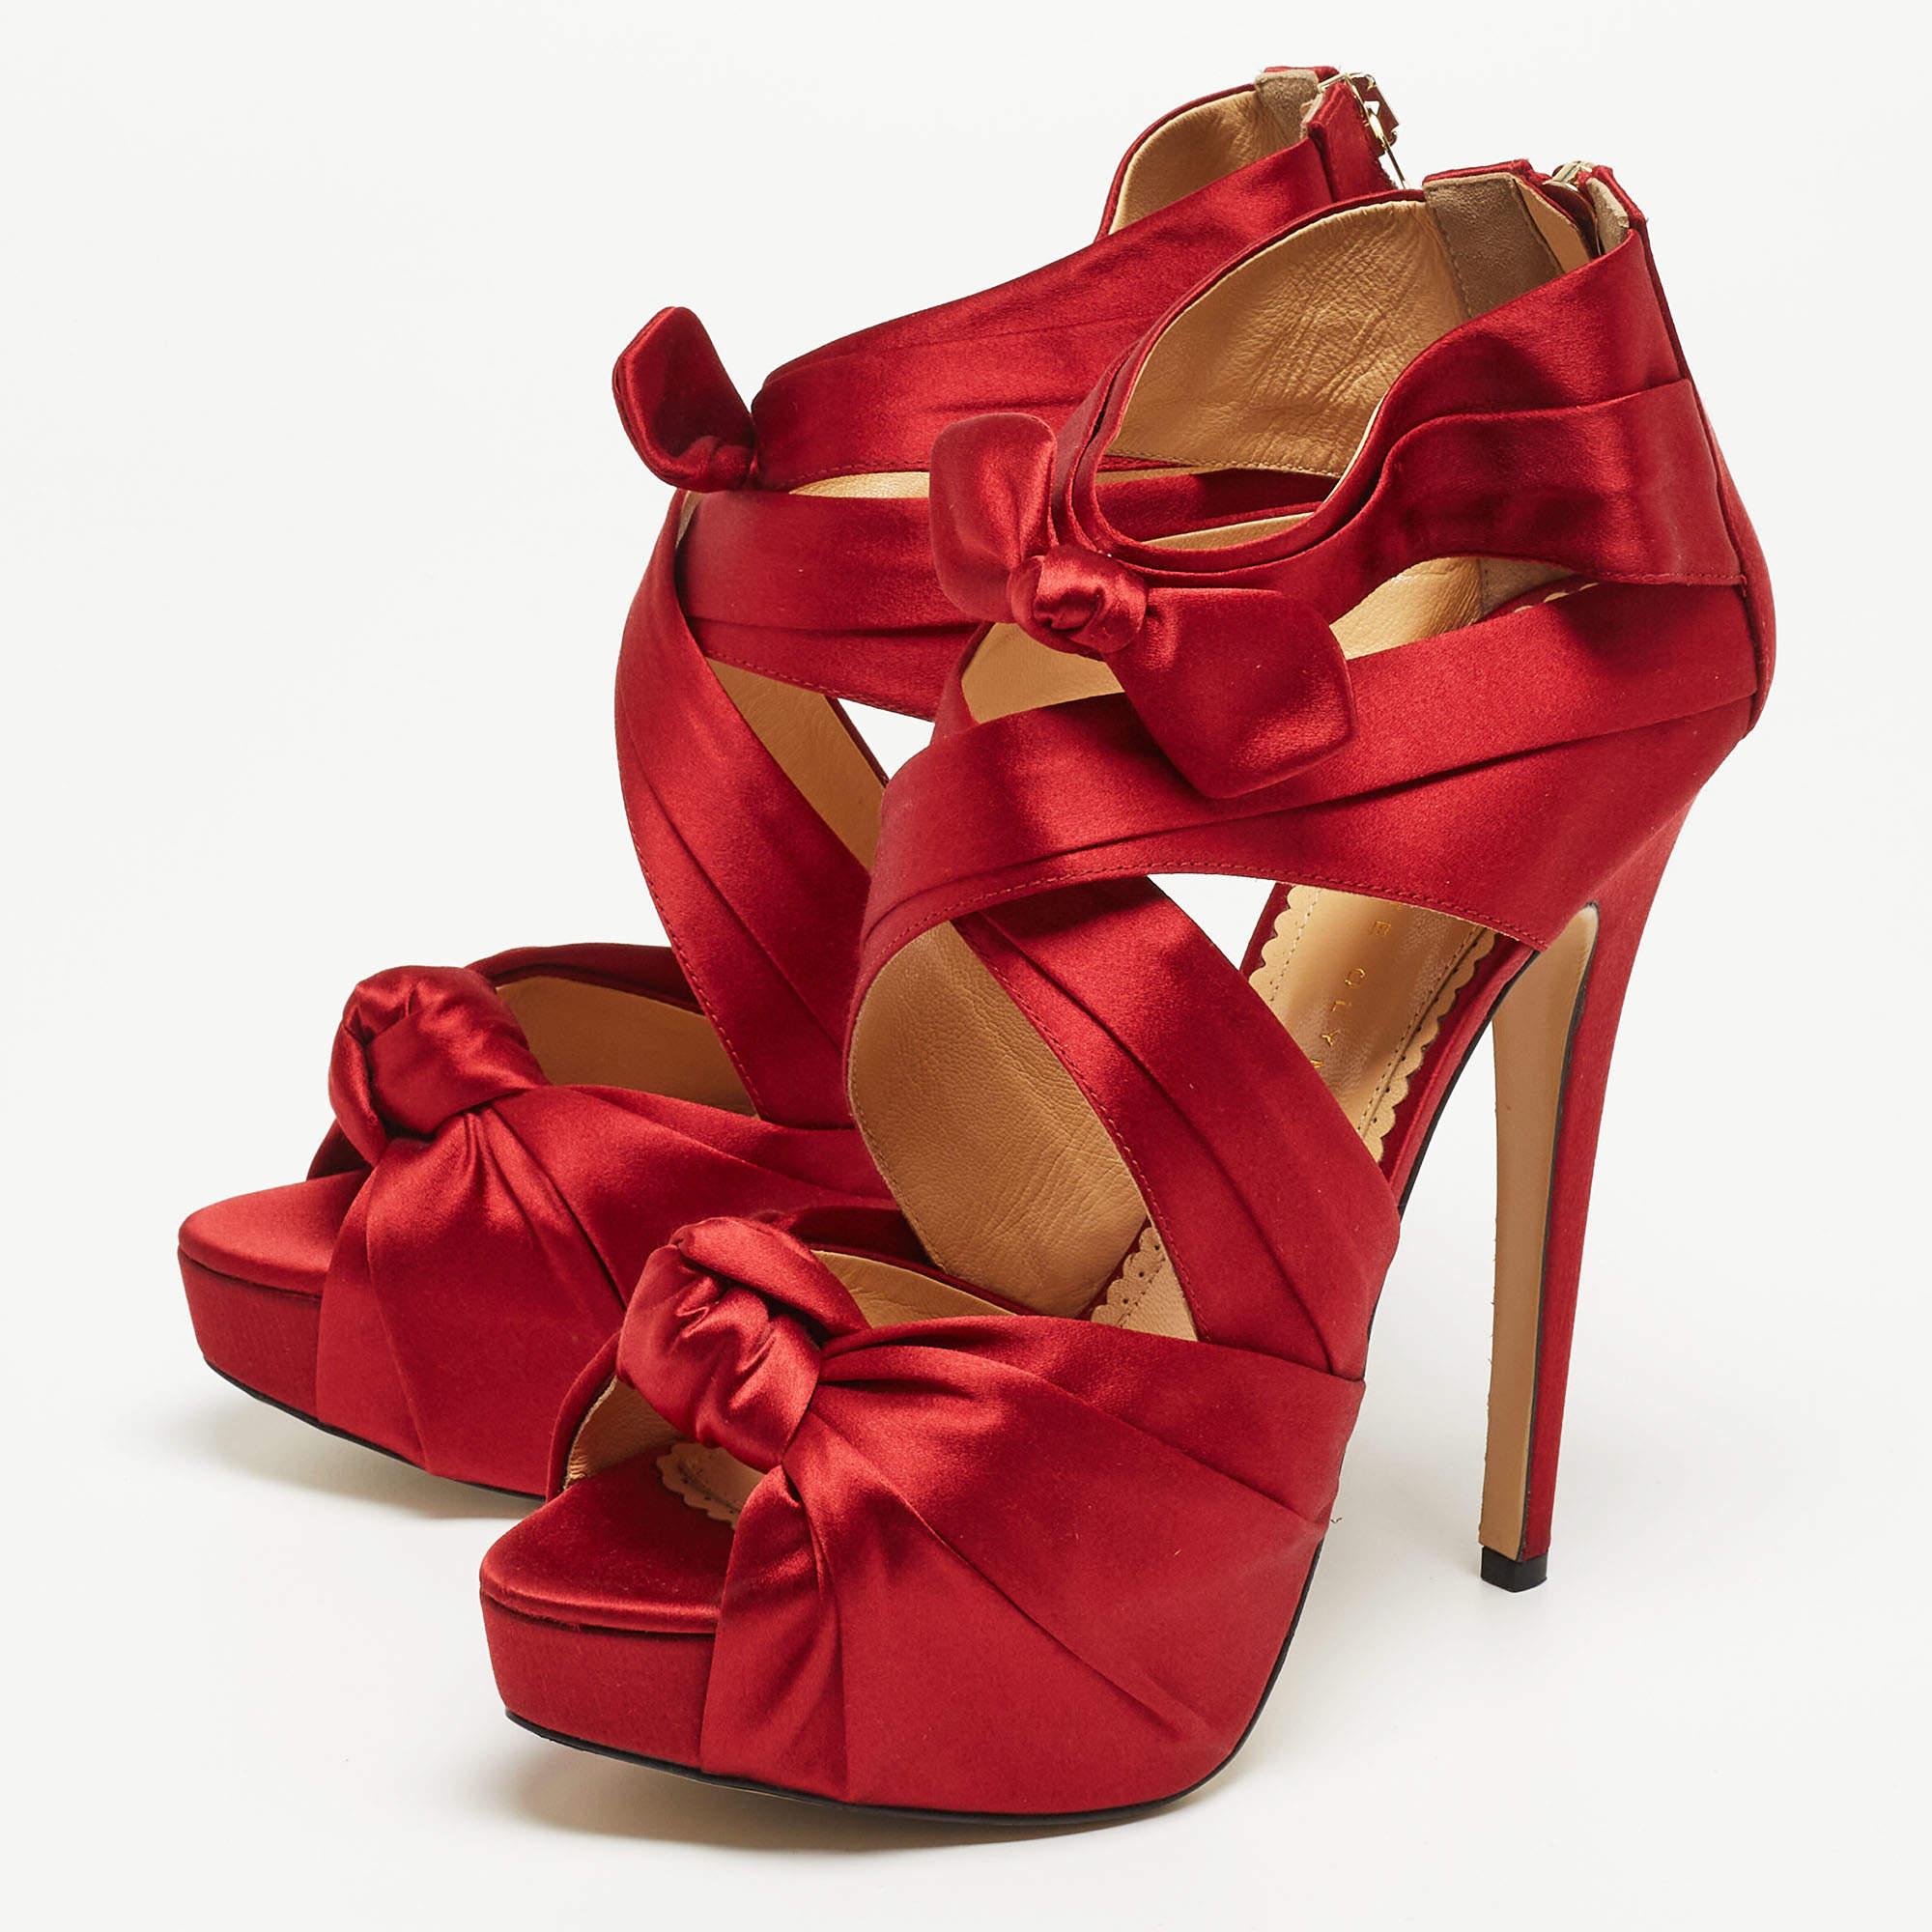 Charlotte Olympia Red Satin Andrea Knotted Platform Sandals Size 41 For Sale 5